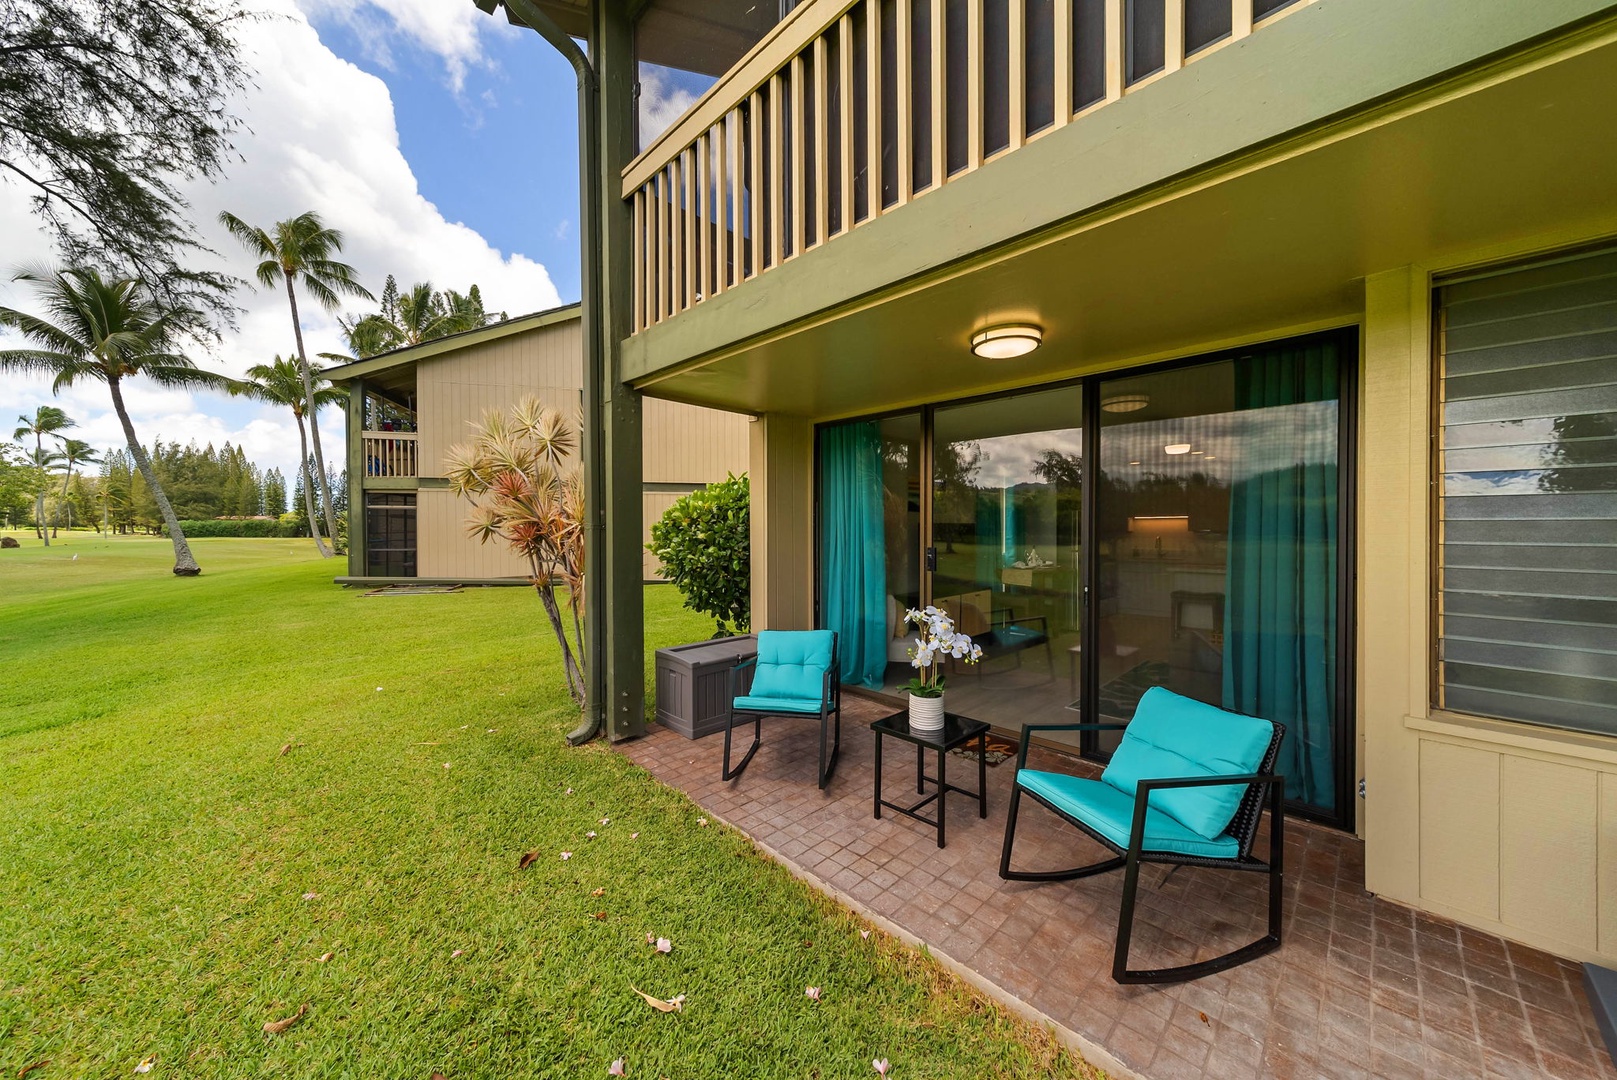 Kahuku Vacation Rentals, Turtle Bay's Kuilima Estates West #104 - Drink your morning coffee or wind down after a long day of adventure here